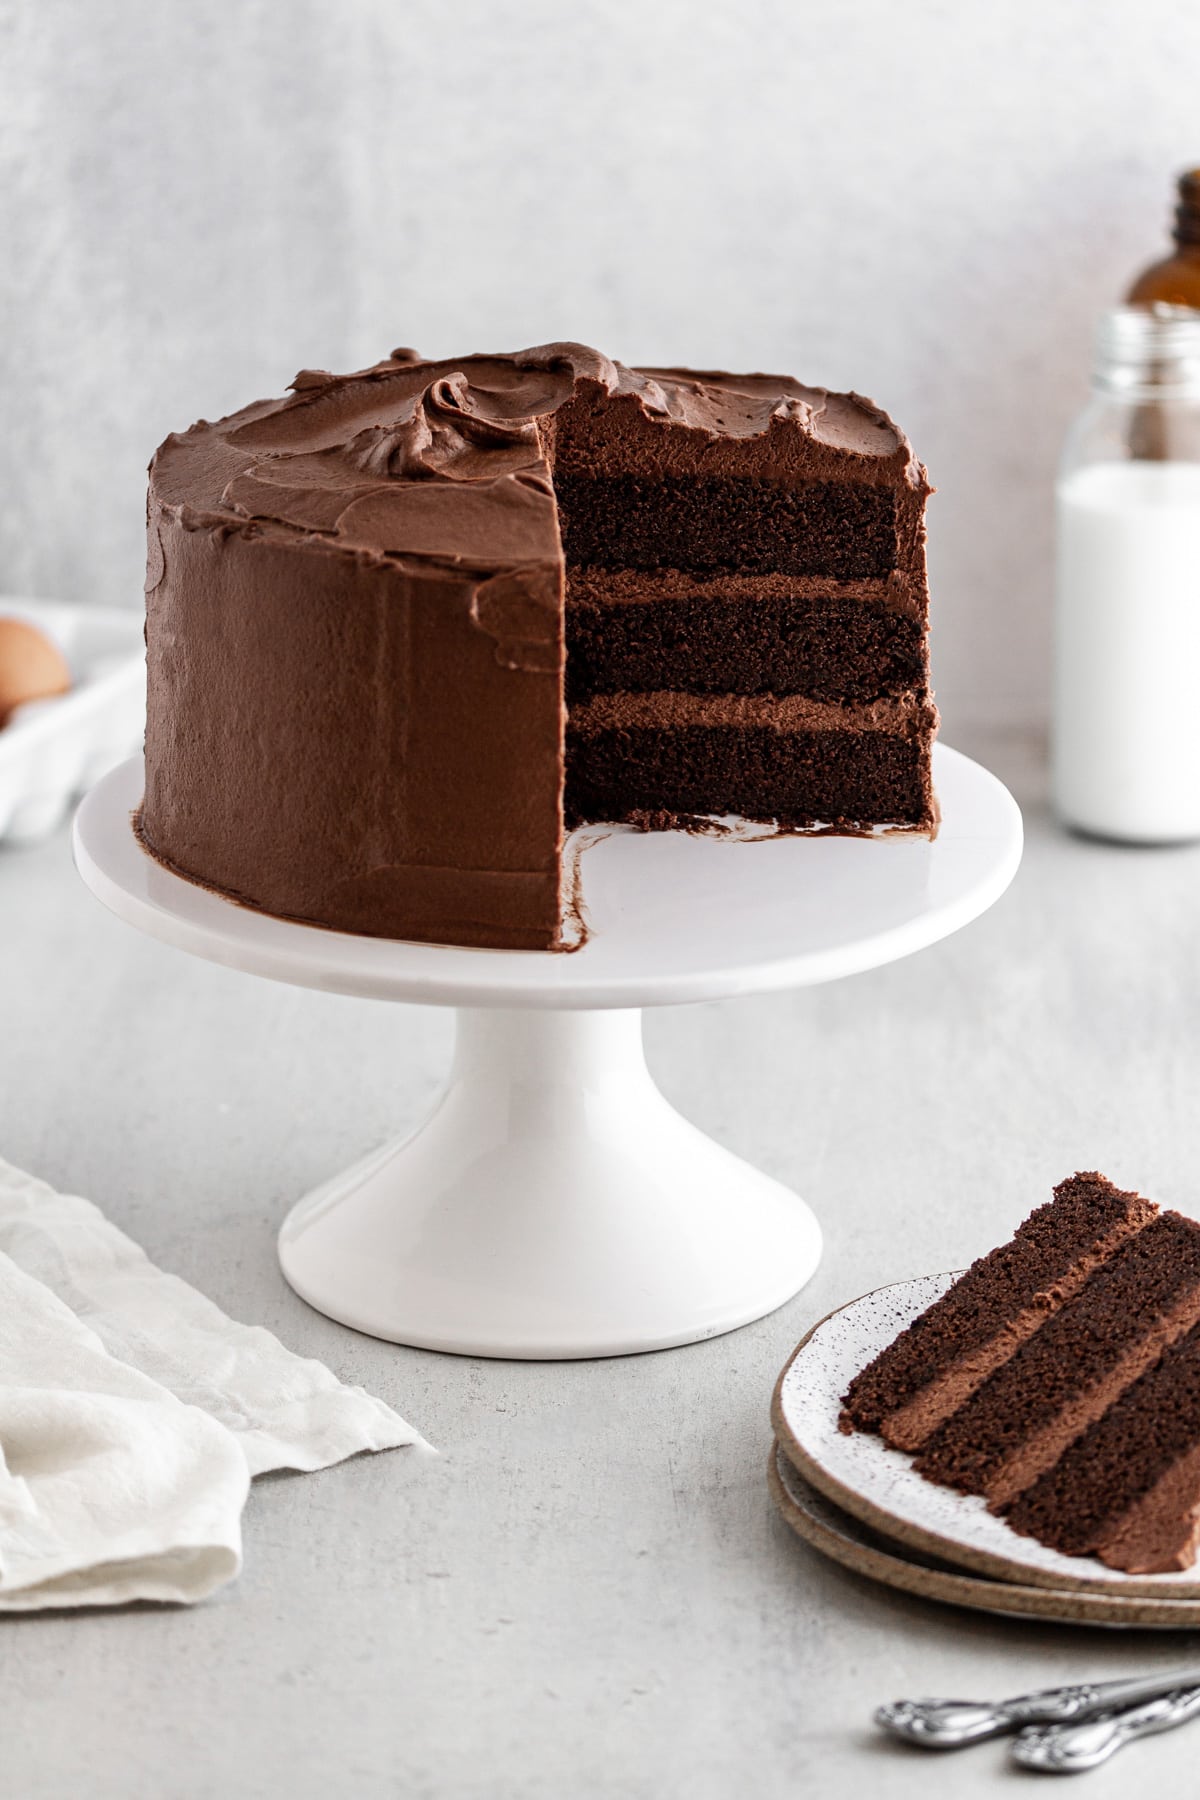 Devil's Food Cake on a cake stand with a slice taken out